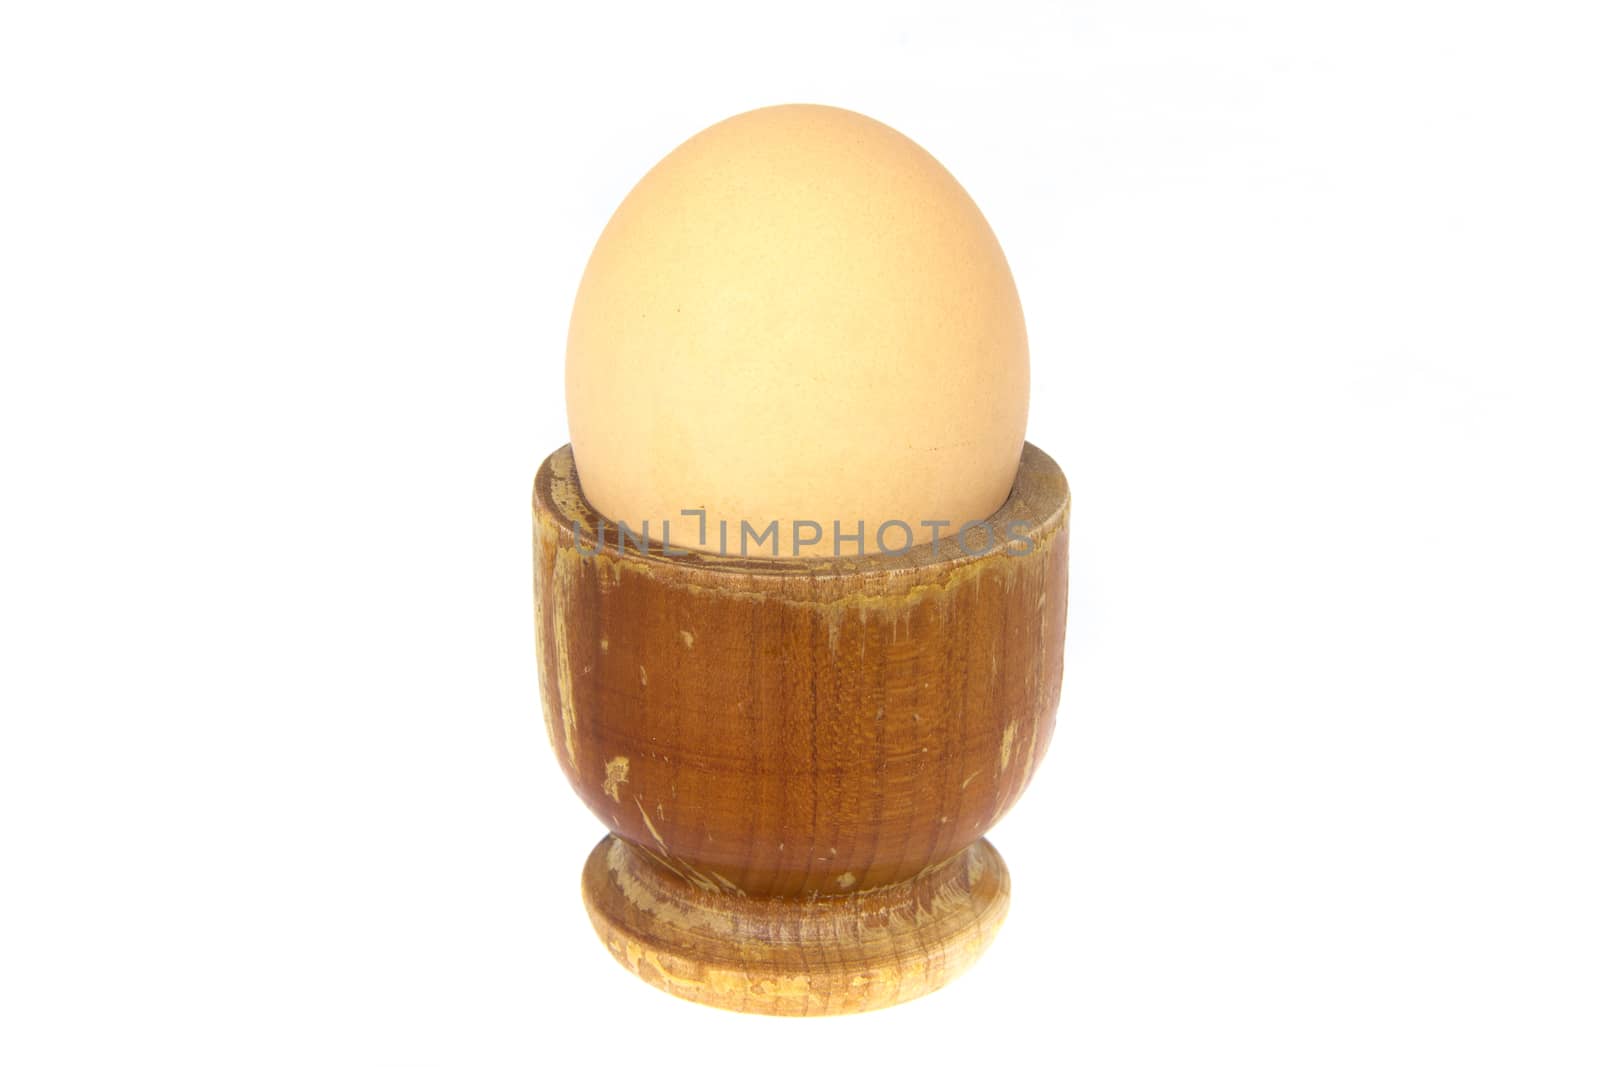 A soft-boiled egg into a vintage wood cup